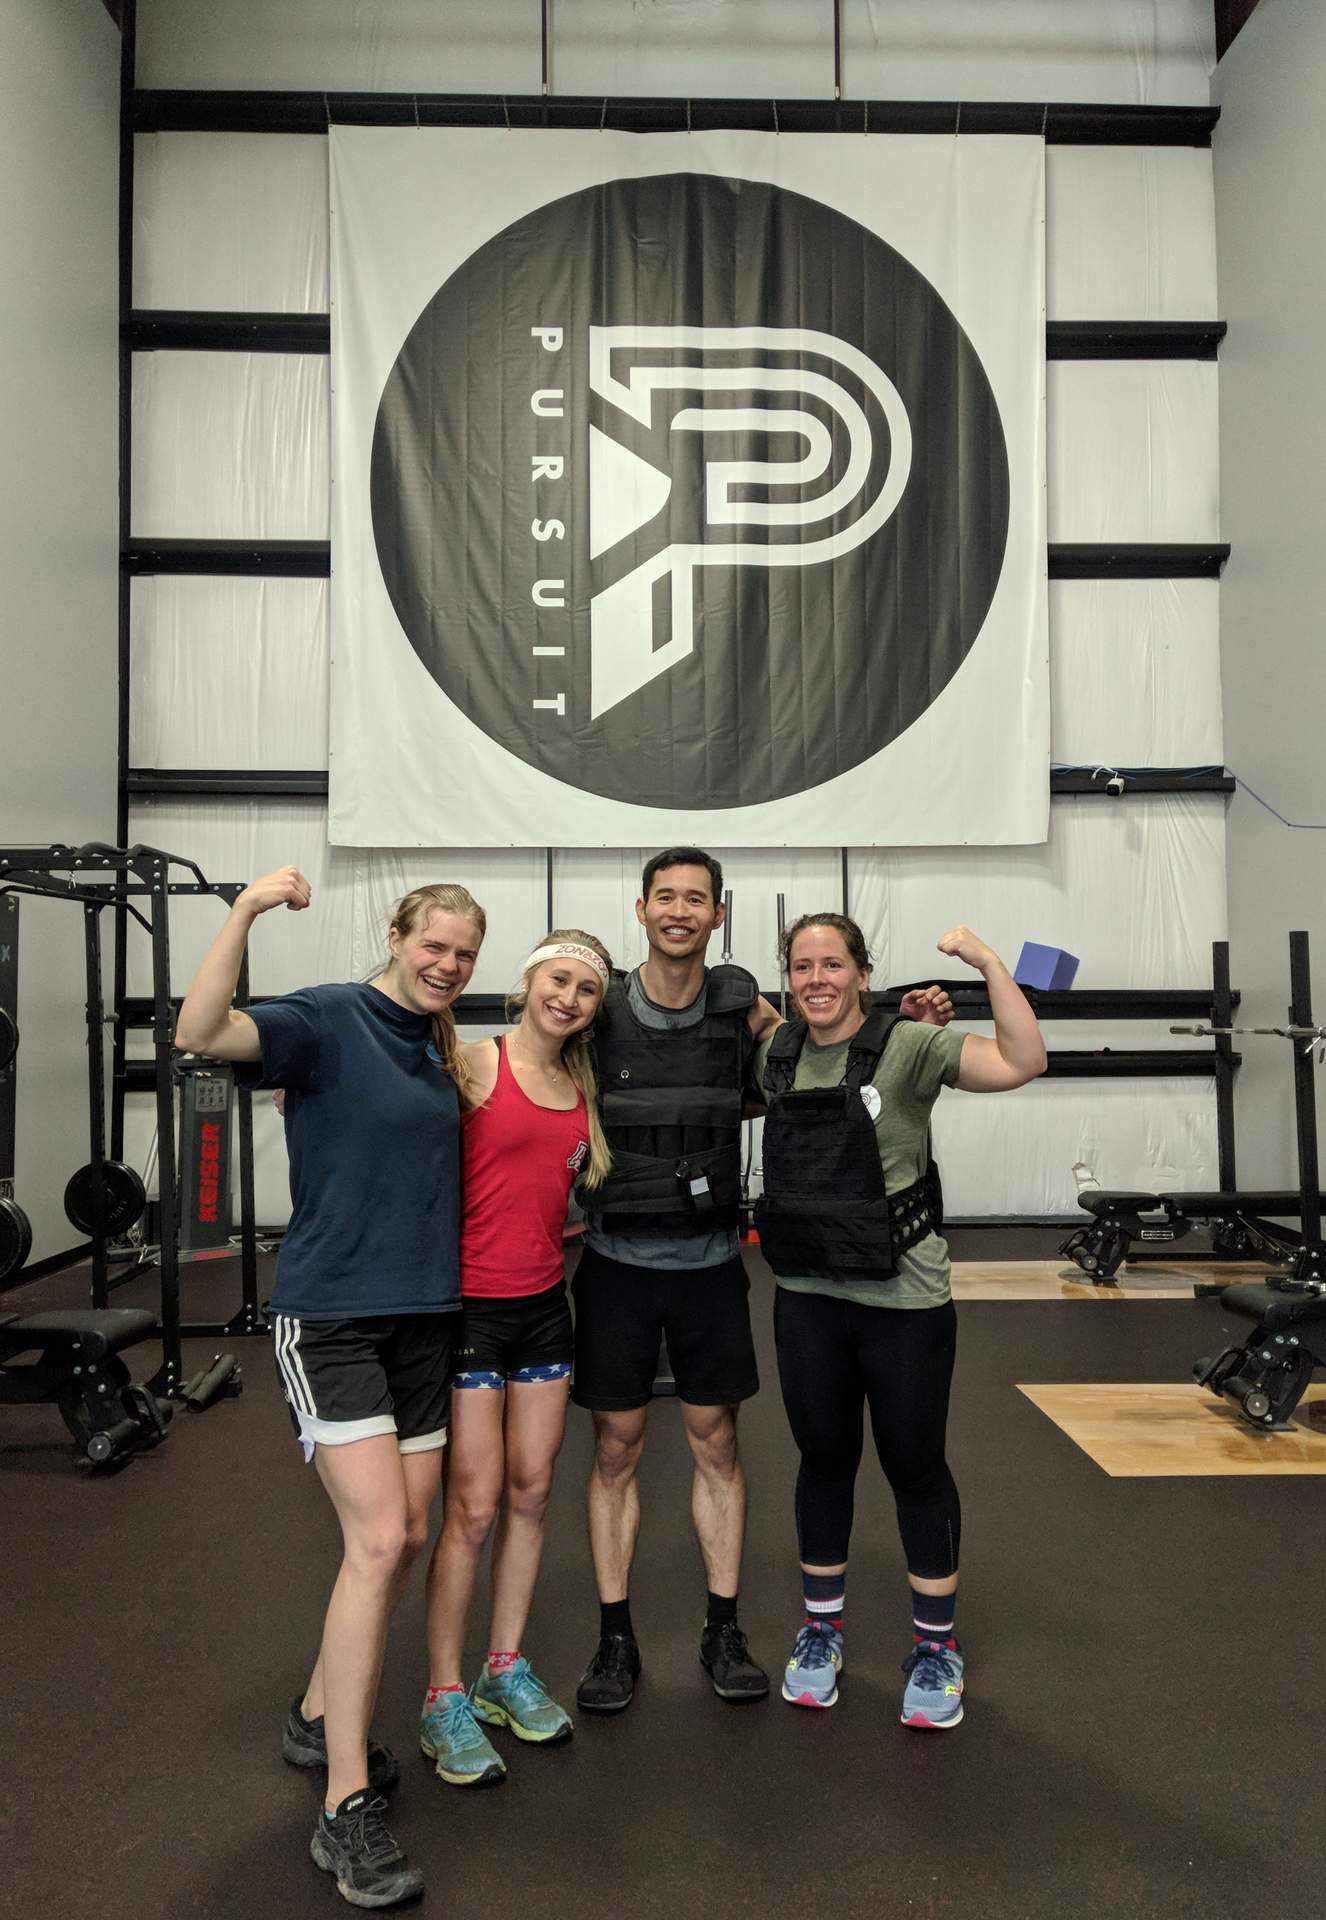 Evelyn, Emily, Felix, and Jennifer after completing the Murph Challenge.